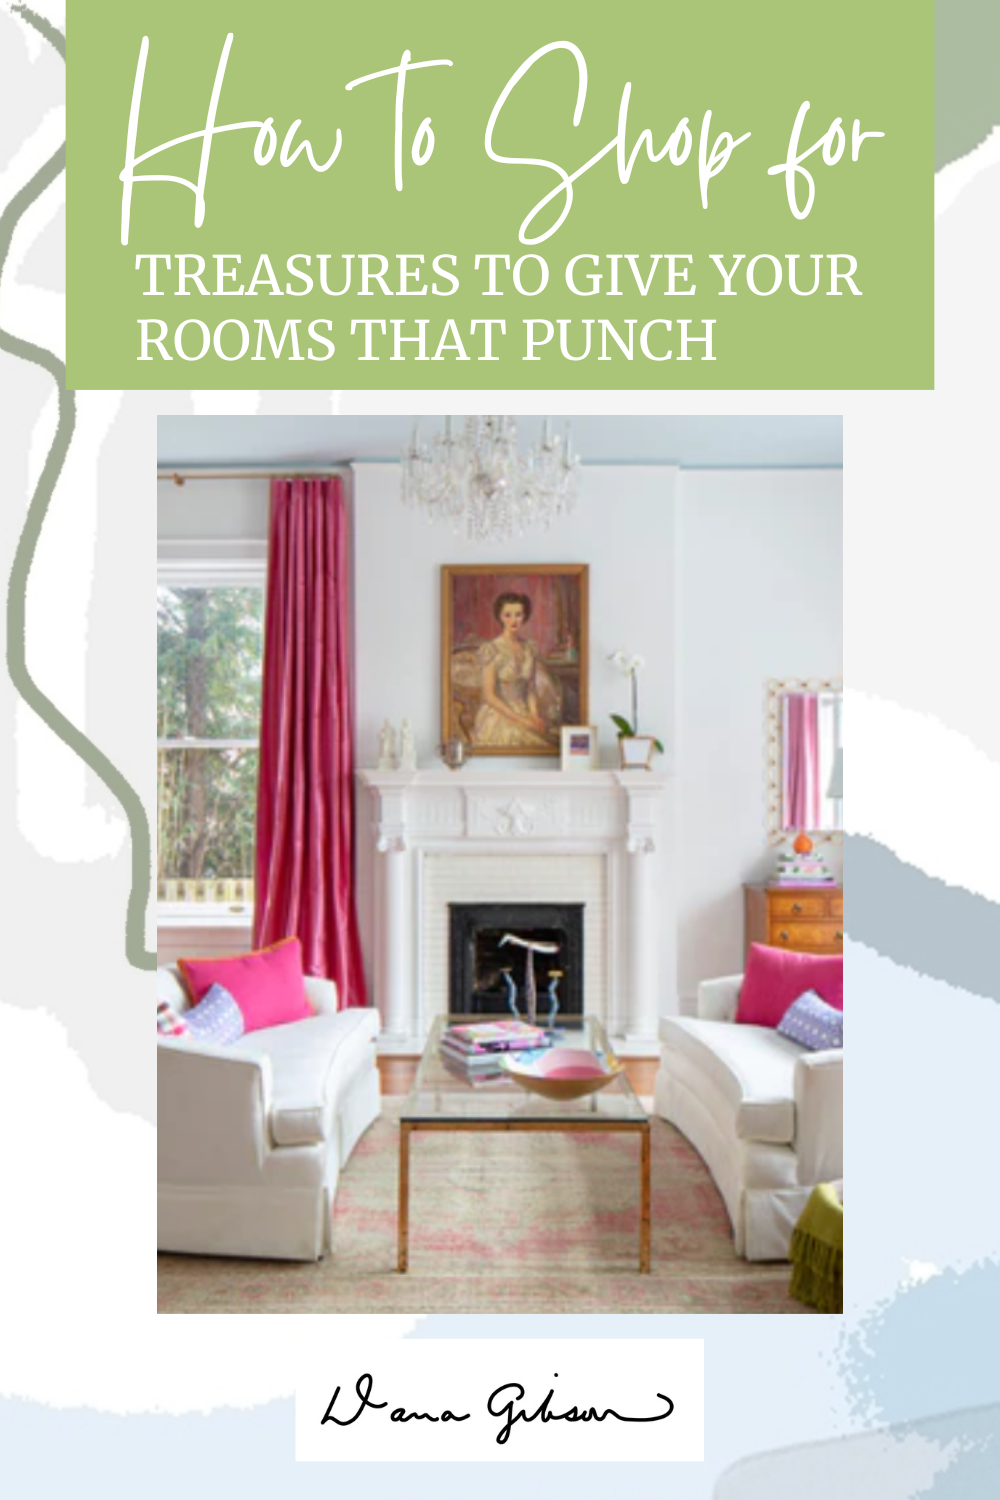 How to Shop for Treasures to Give Your Rooms That Punch